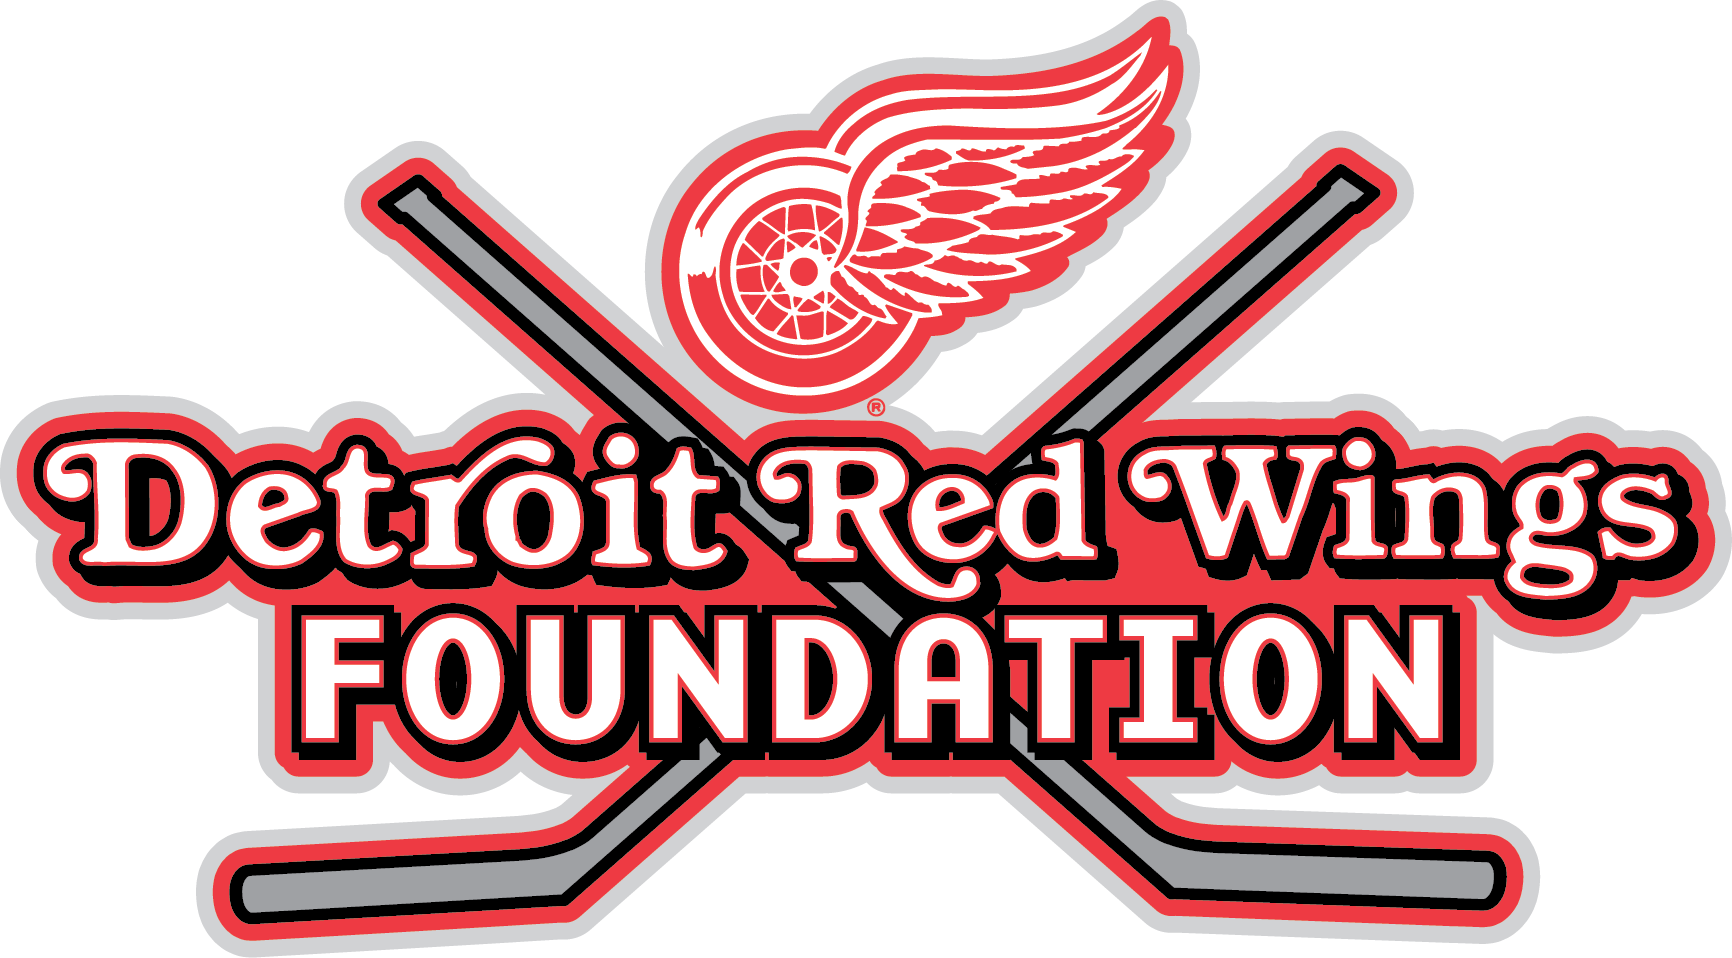 The Detroit Red Wings Foundation and The Children's Foundation to